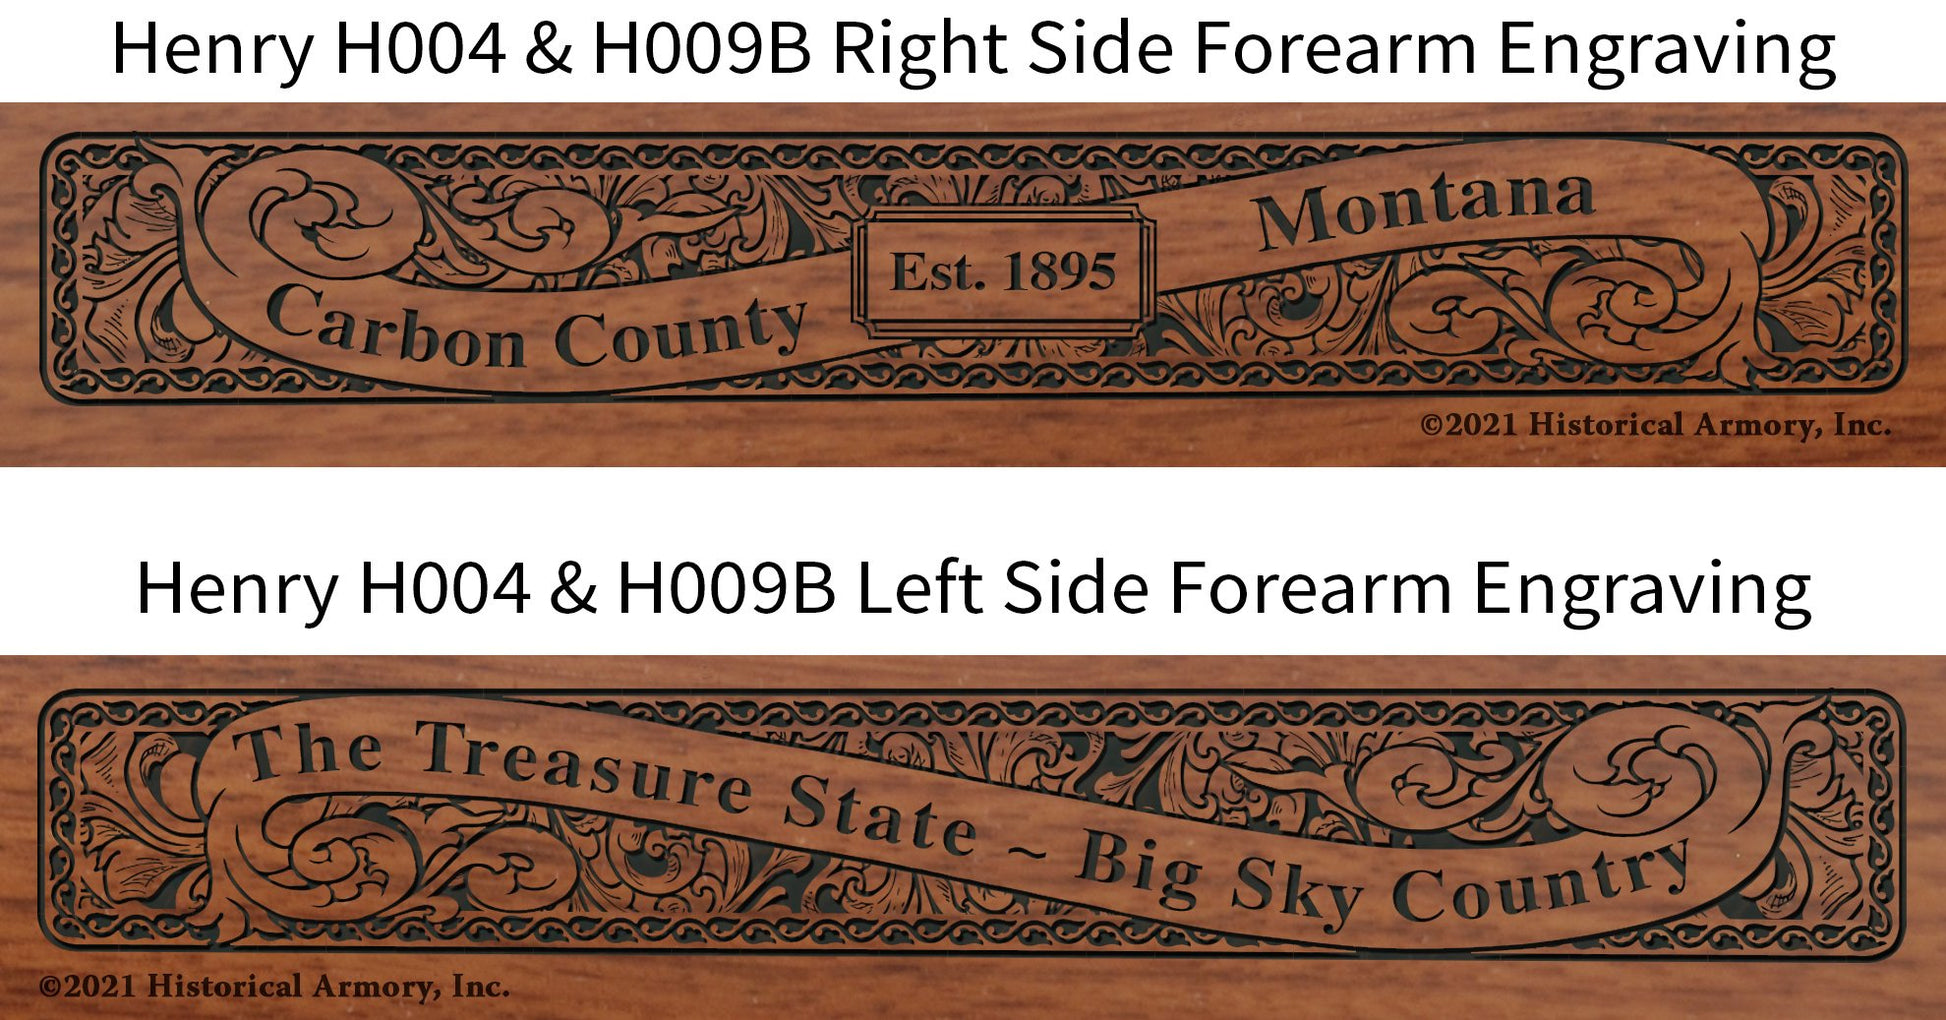 Carbon County Montana Engraved Rifle H004 & H009B Forearm Engraving